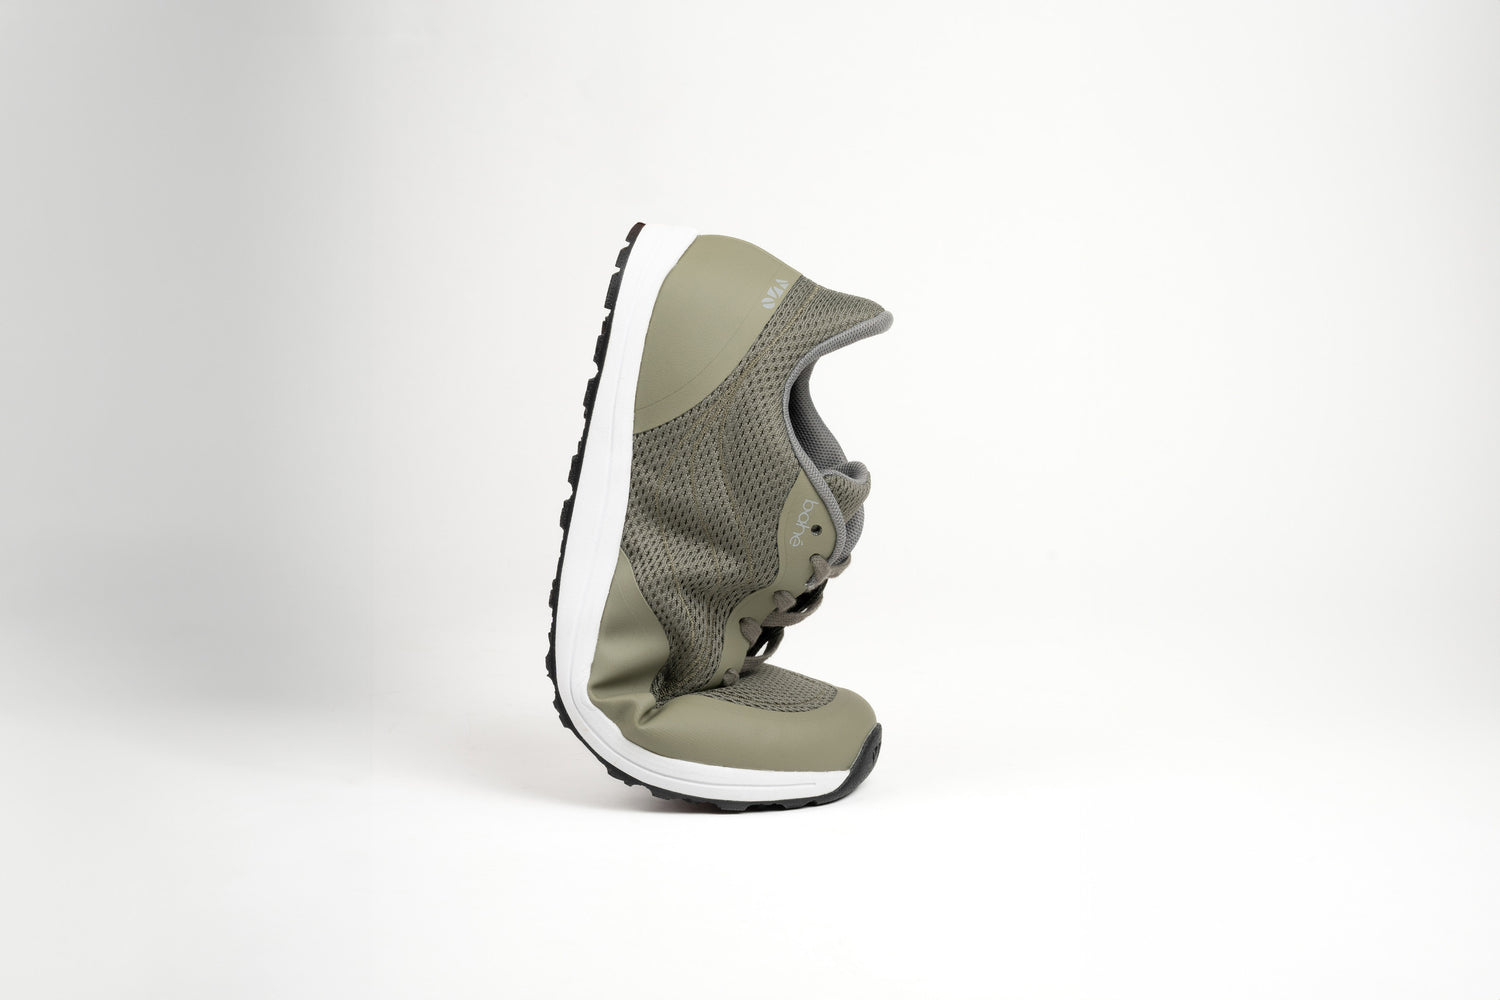 Bahé Revive barefoot style grounding shoe in Forest (green) being flexed to highlight the flexibility of the shoe construction